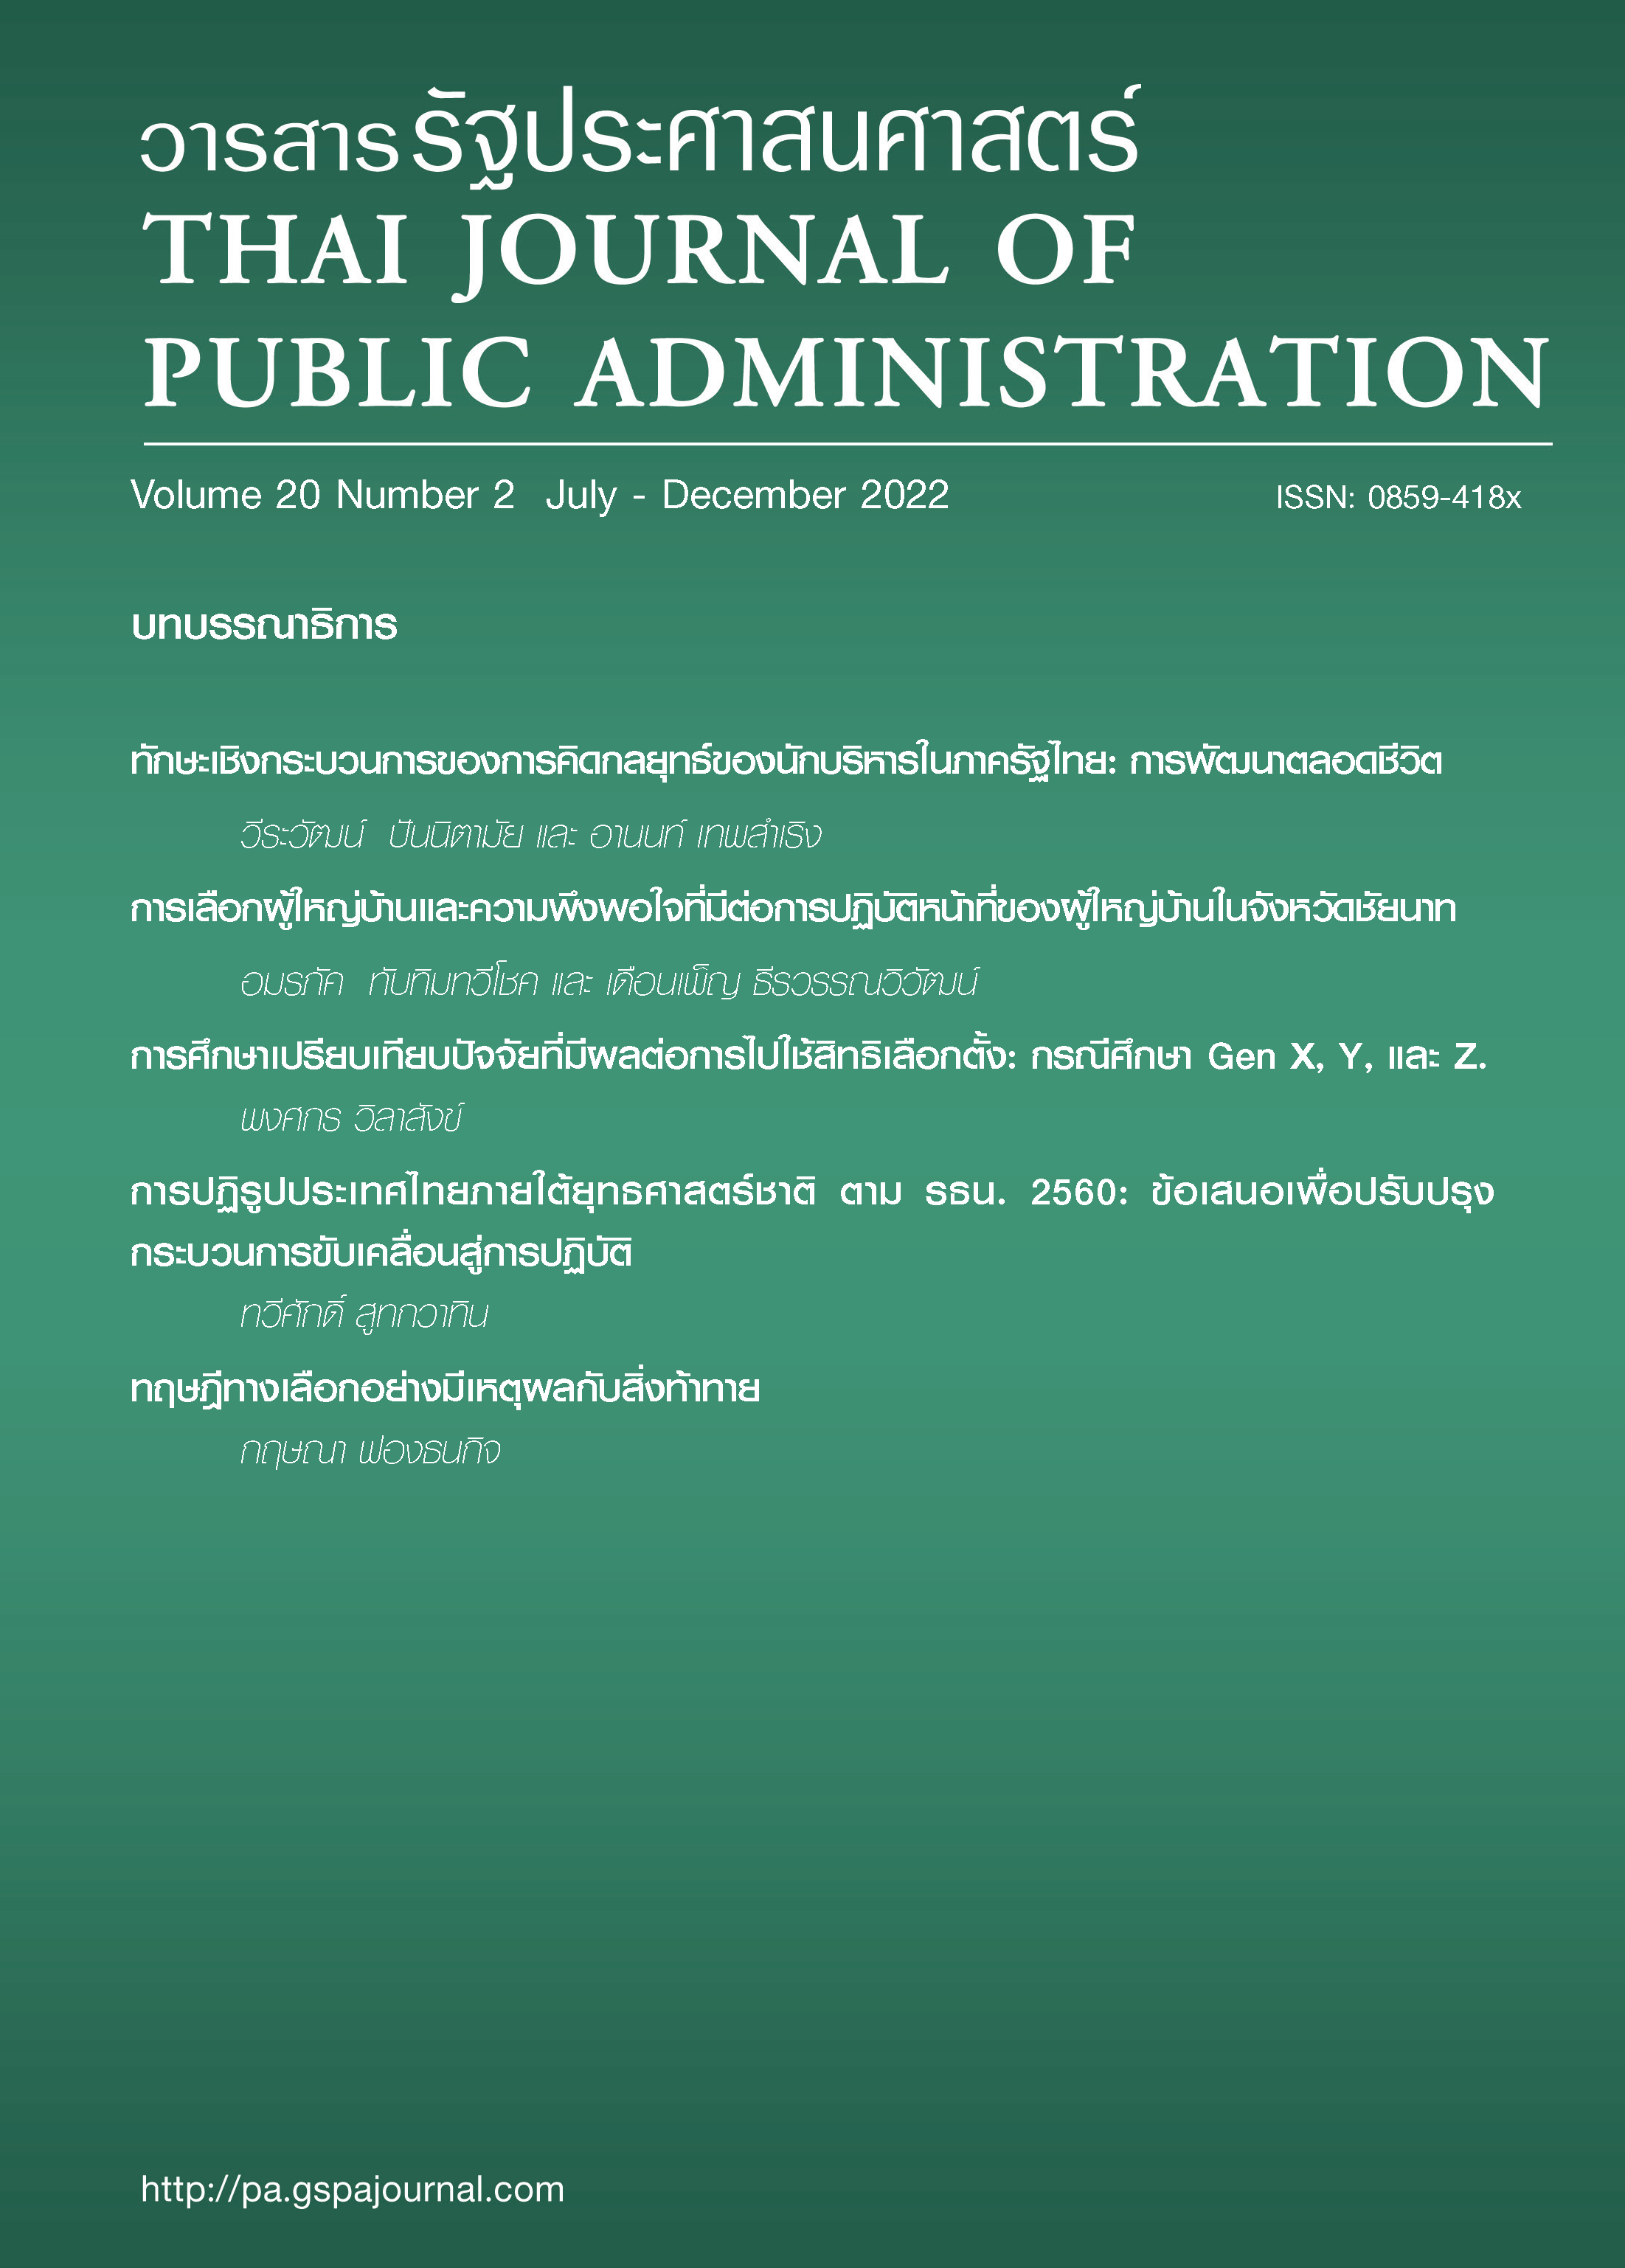 					View Vol. 20 No. 2 (2022): Thai Journal of Public Administration Volume 20 Number 2
				